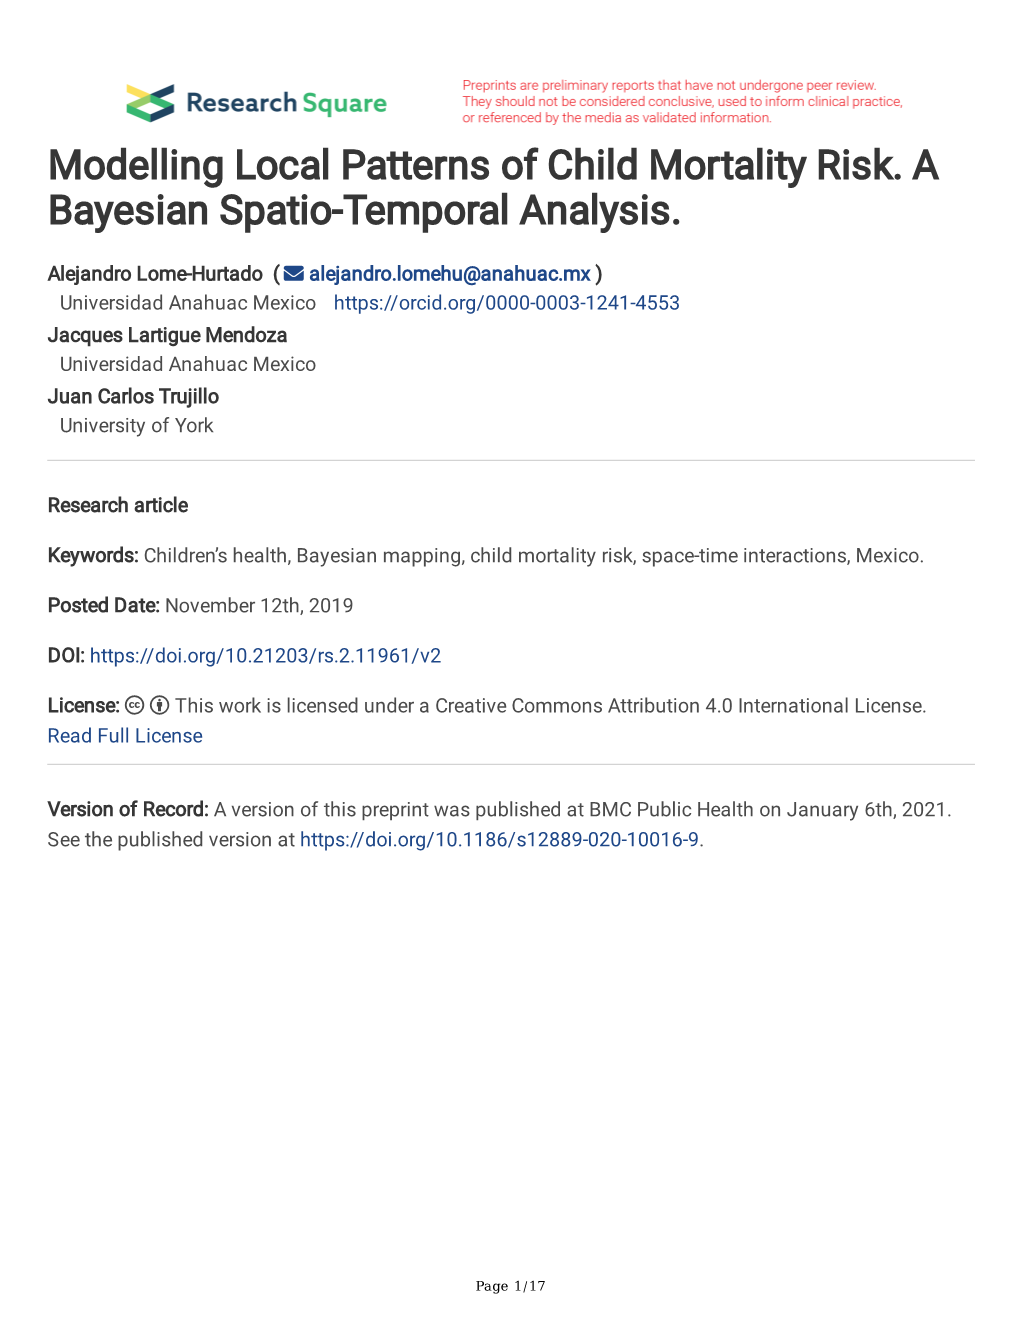 Modelling Local Patterns of Child Mortality Risk. a Bayesian Spatio-Temporal Analysis